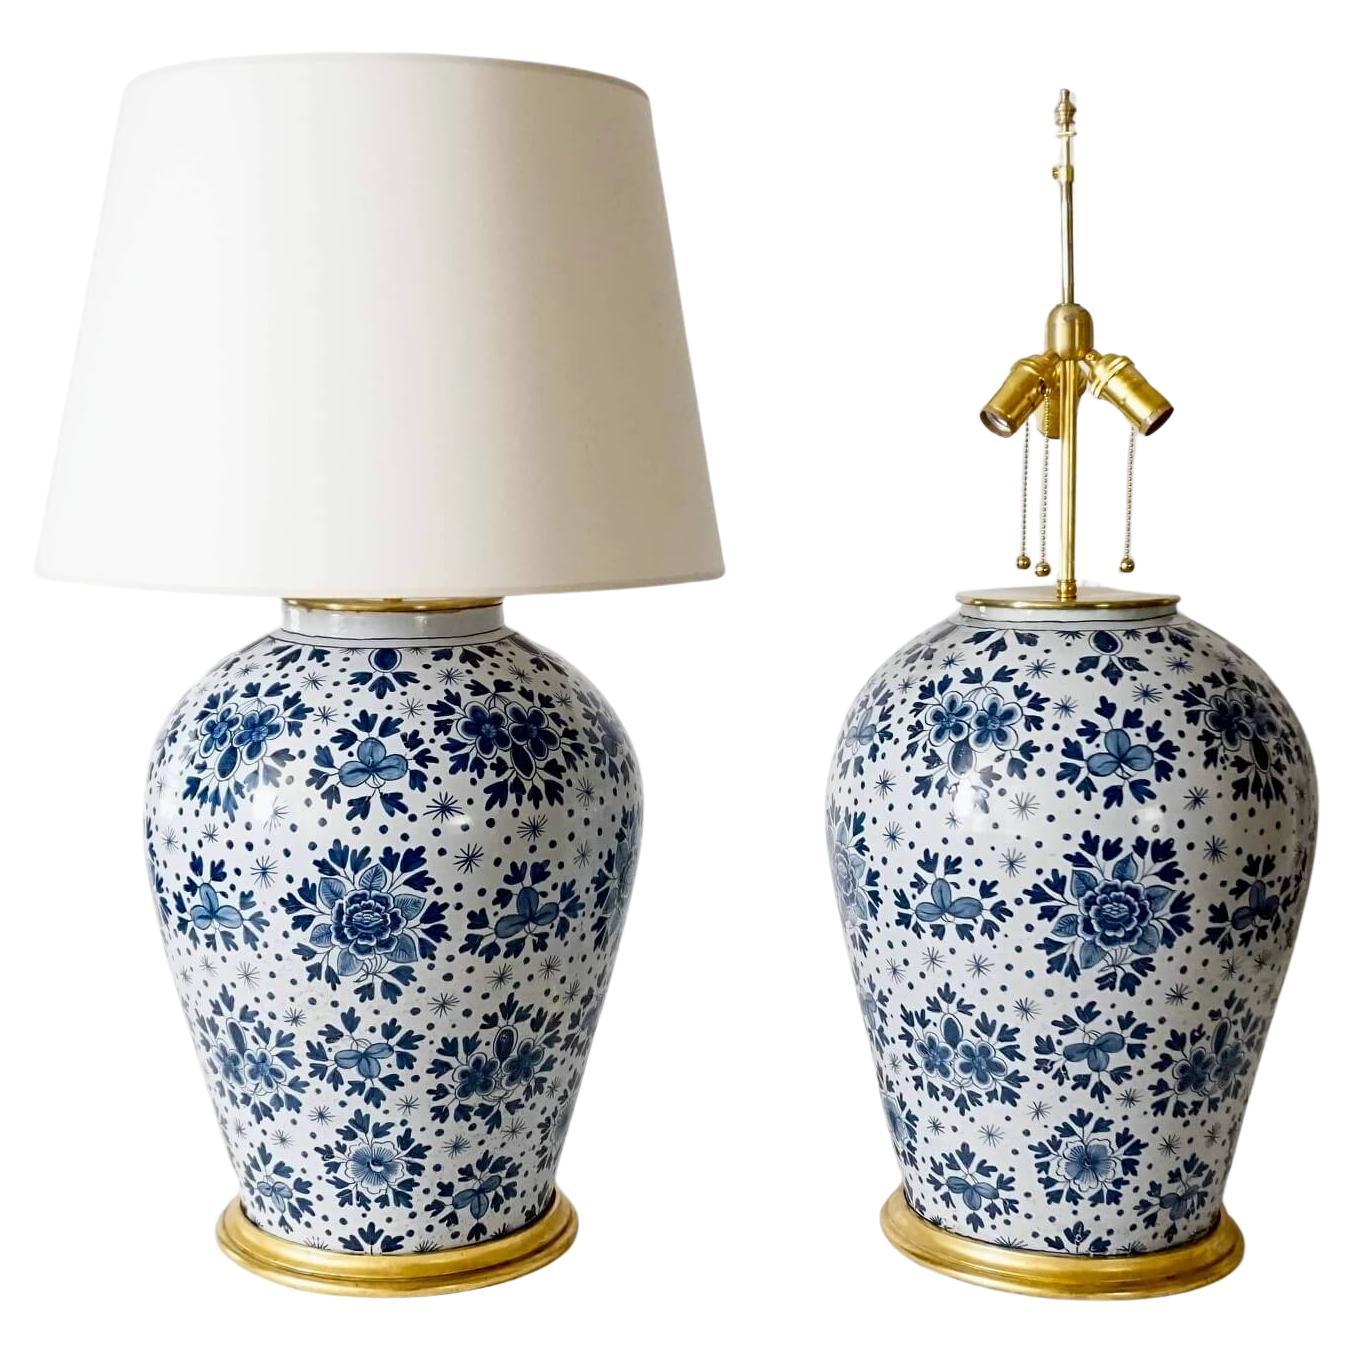 Pair of Large Scale Blue and White Dutch Delft Vase Table Lamps, circa 1850 For Sale